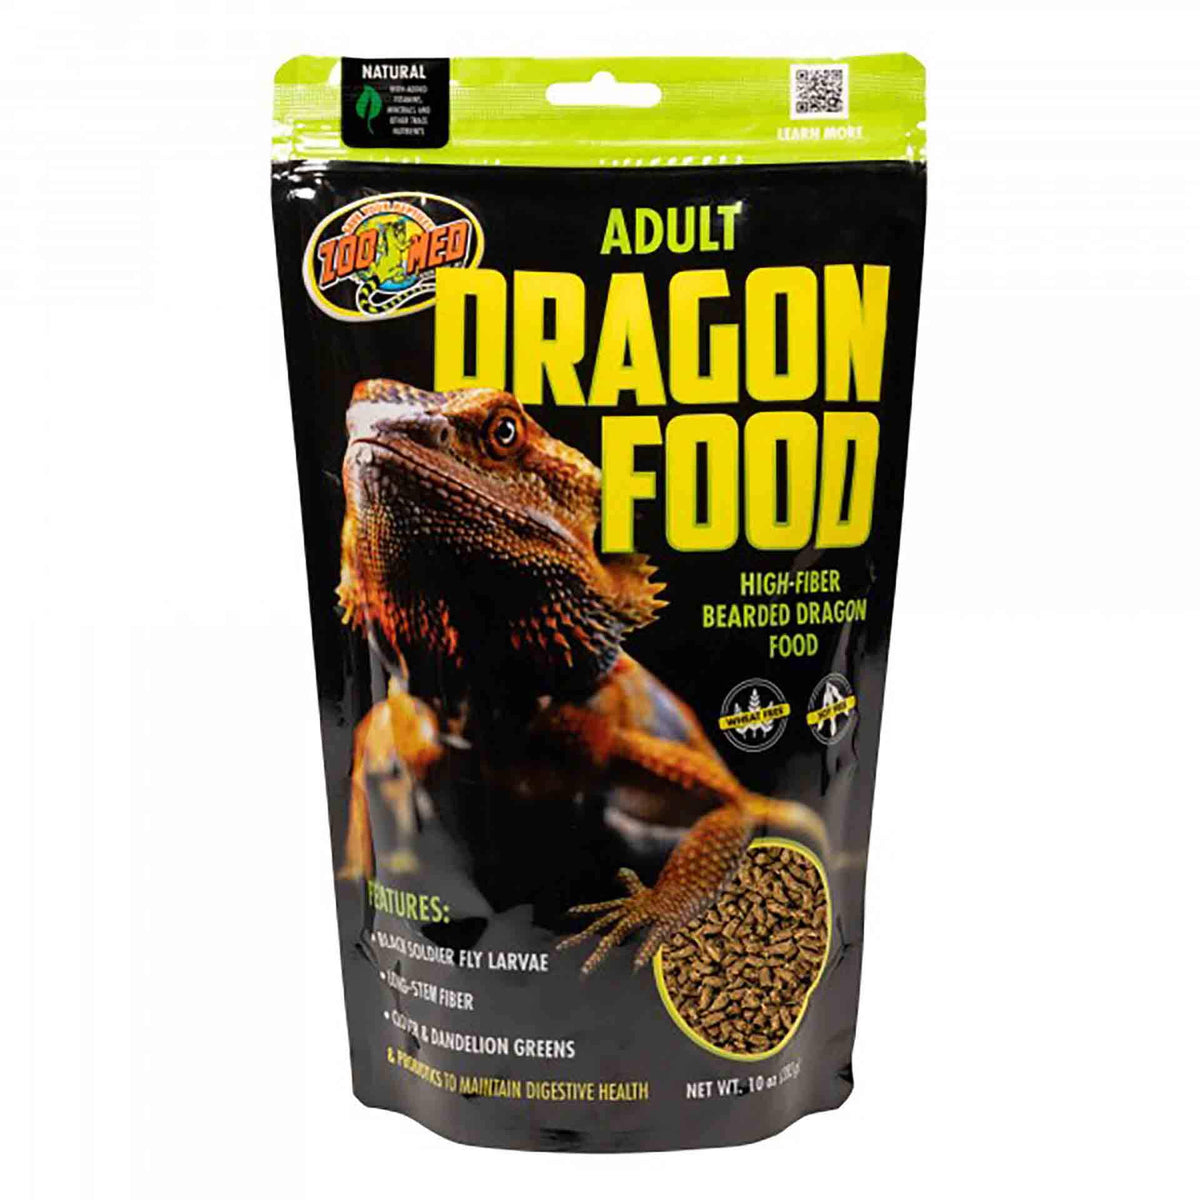 Zoo Med Insect High-Fiber Bearded Dragon Food Adult 283gm